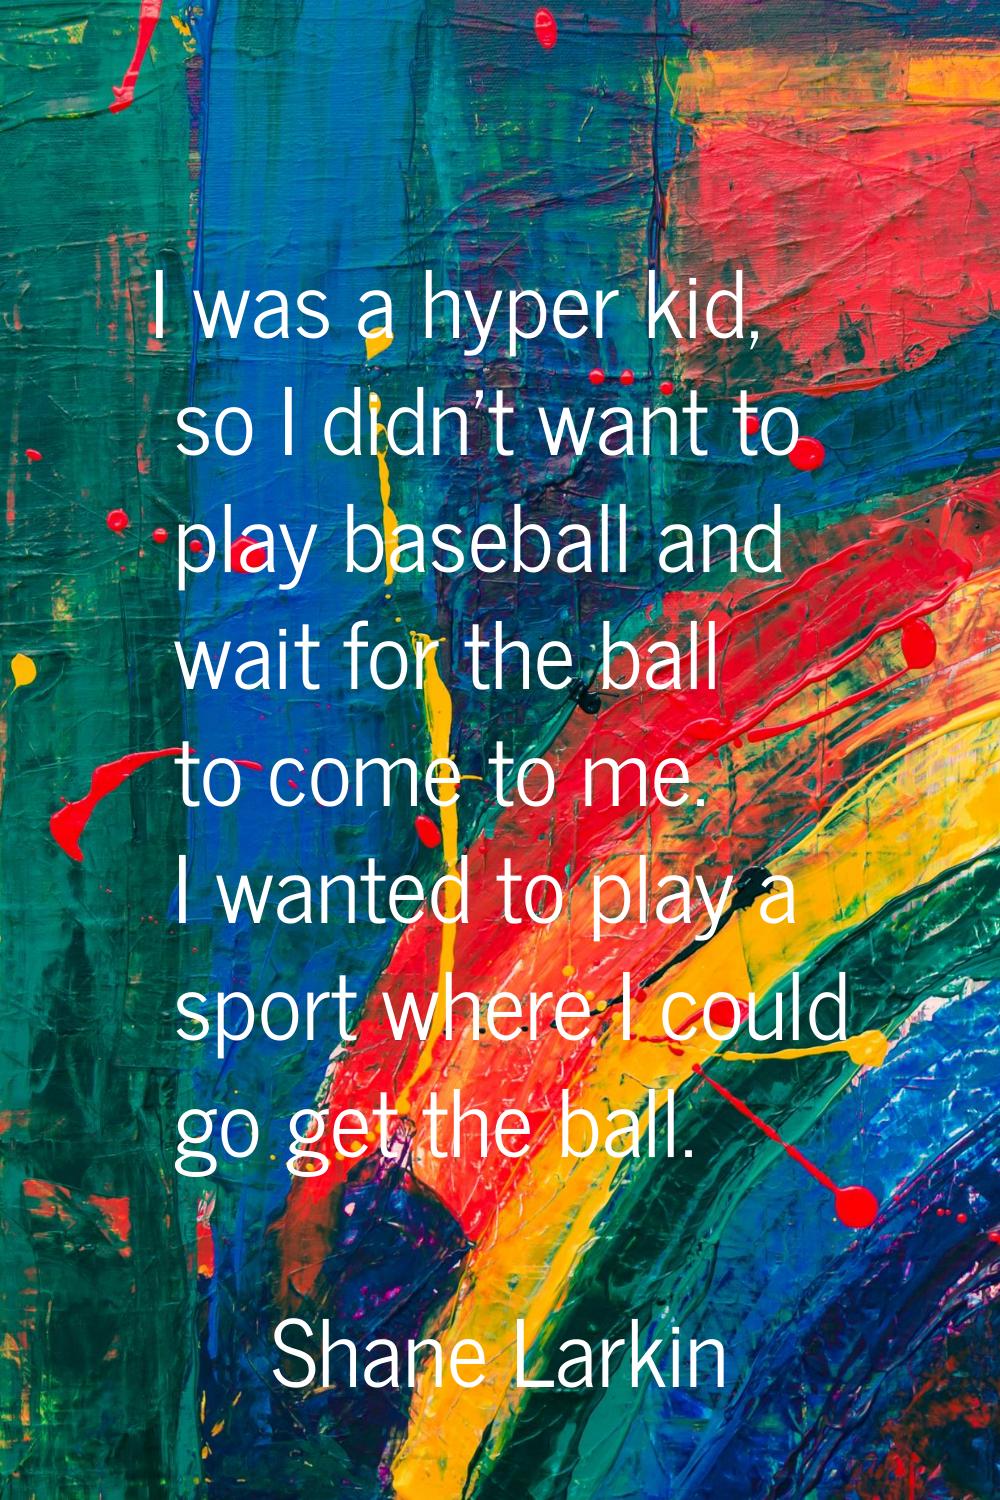 I was a hyper kid, so I didn't want to play baseball and wait for the ball to come to me. I wanted 